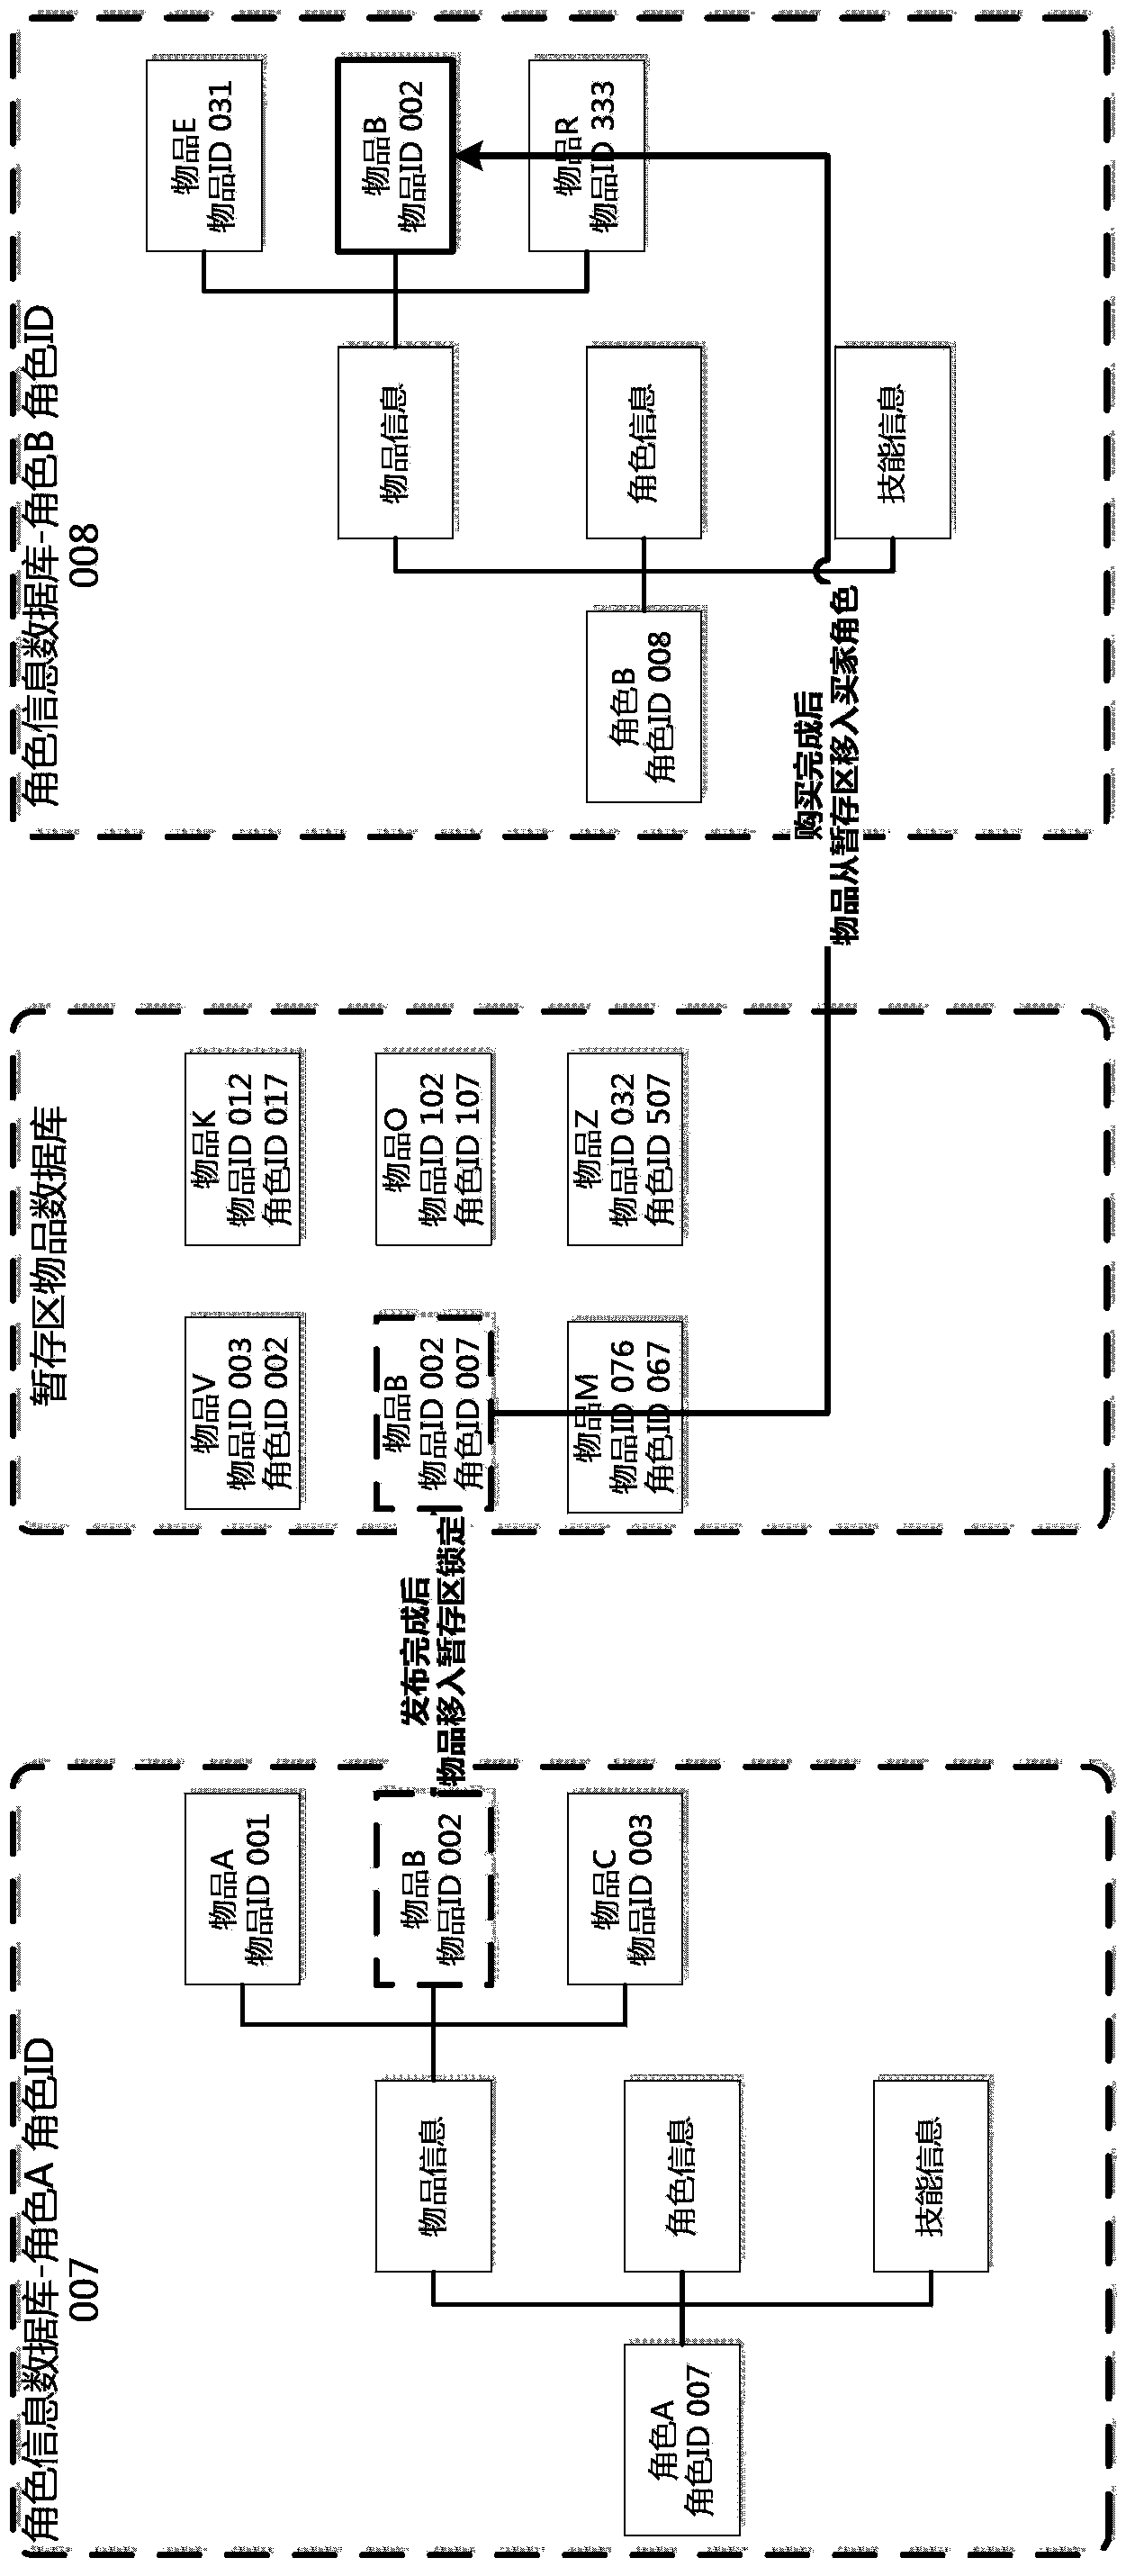 Online application virtual resource transfer method, device and system